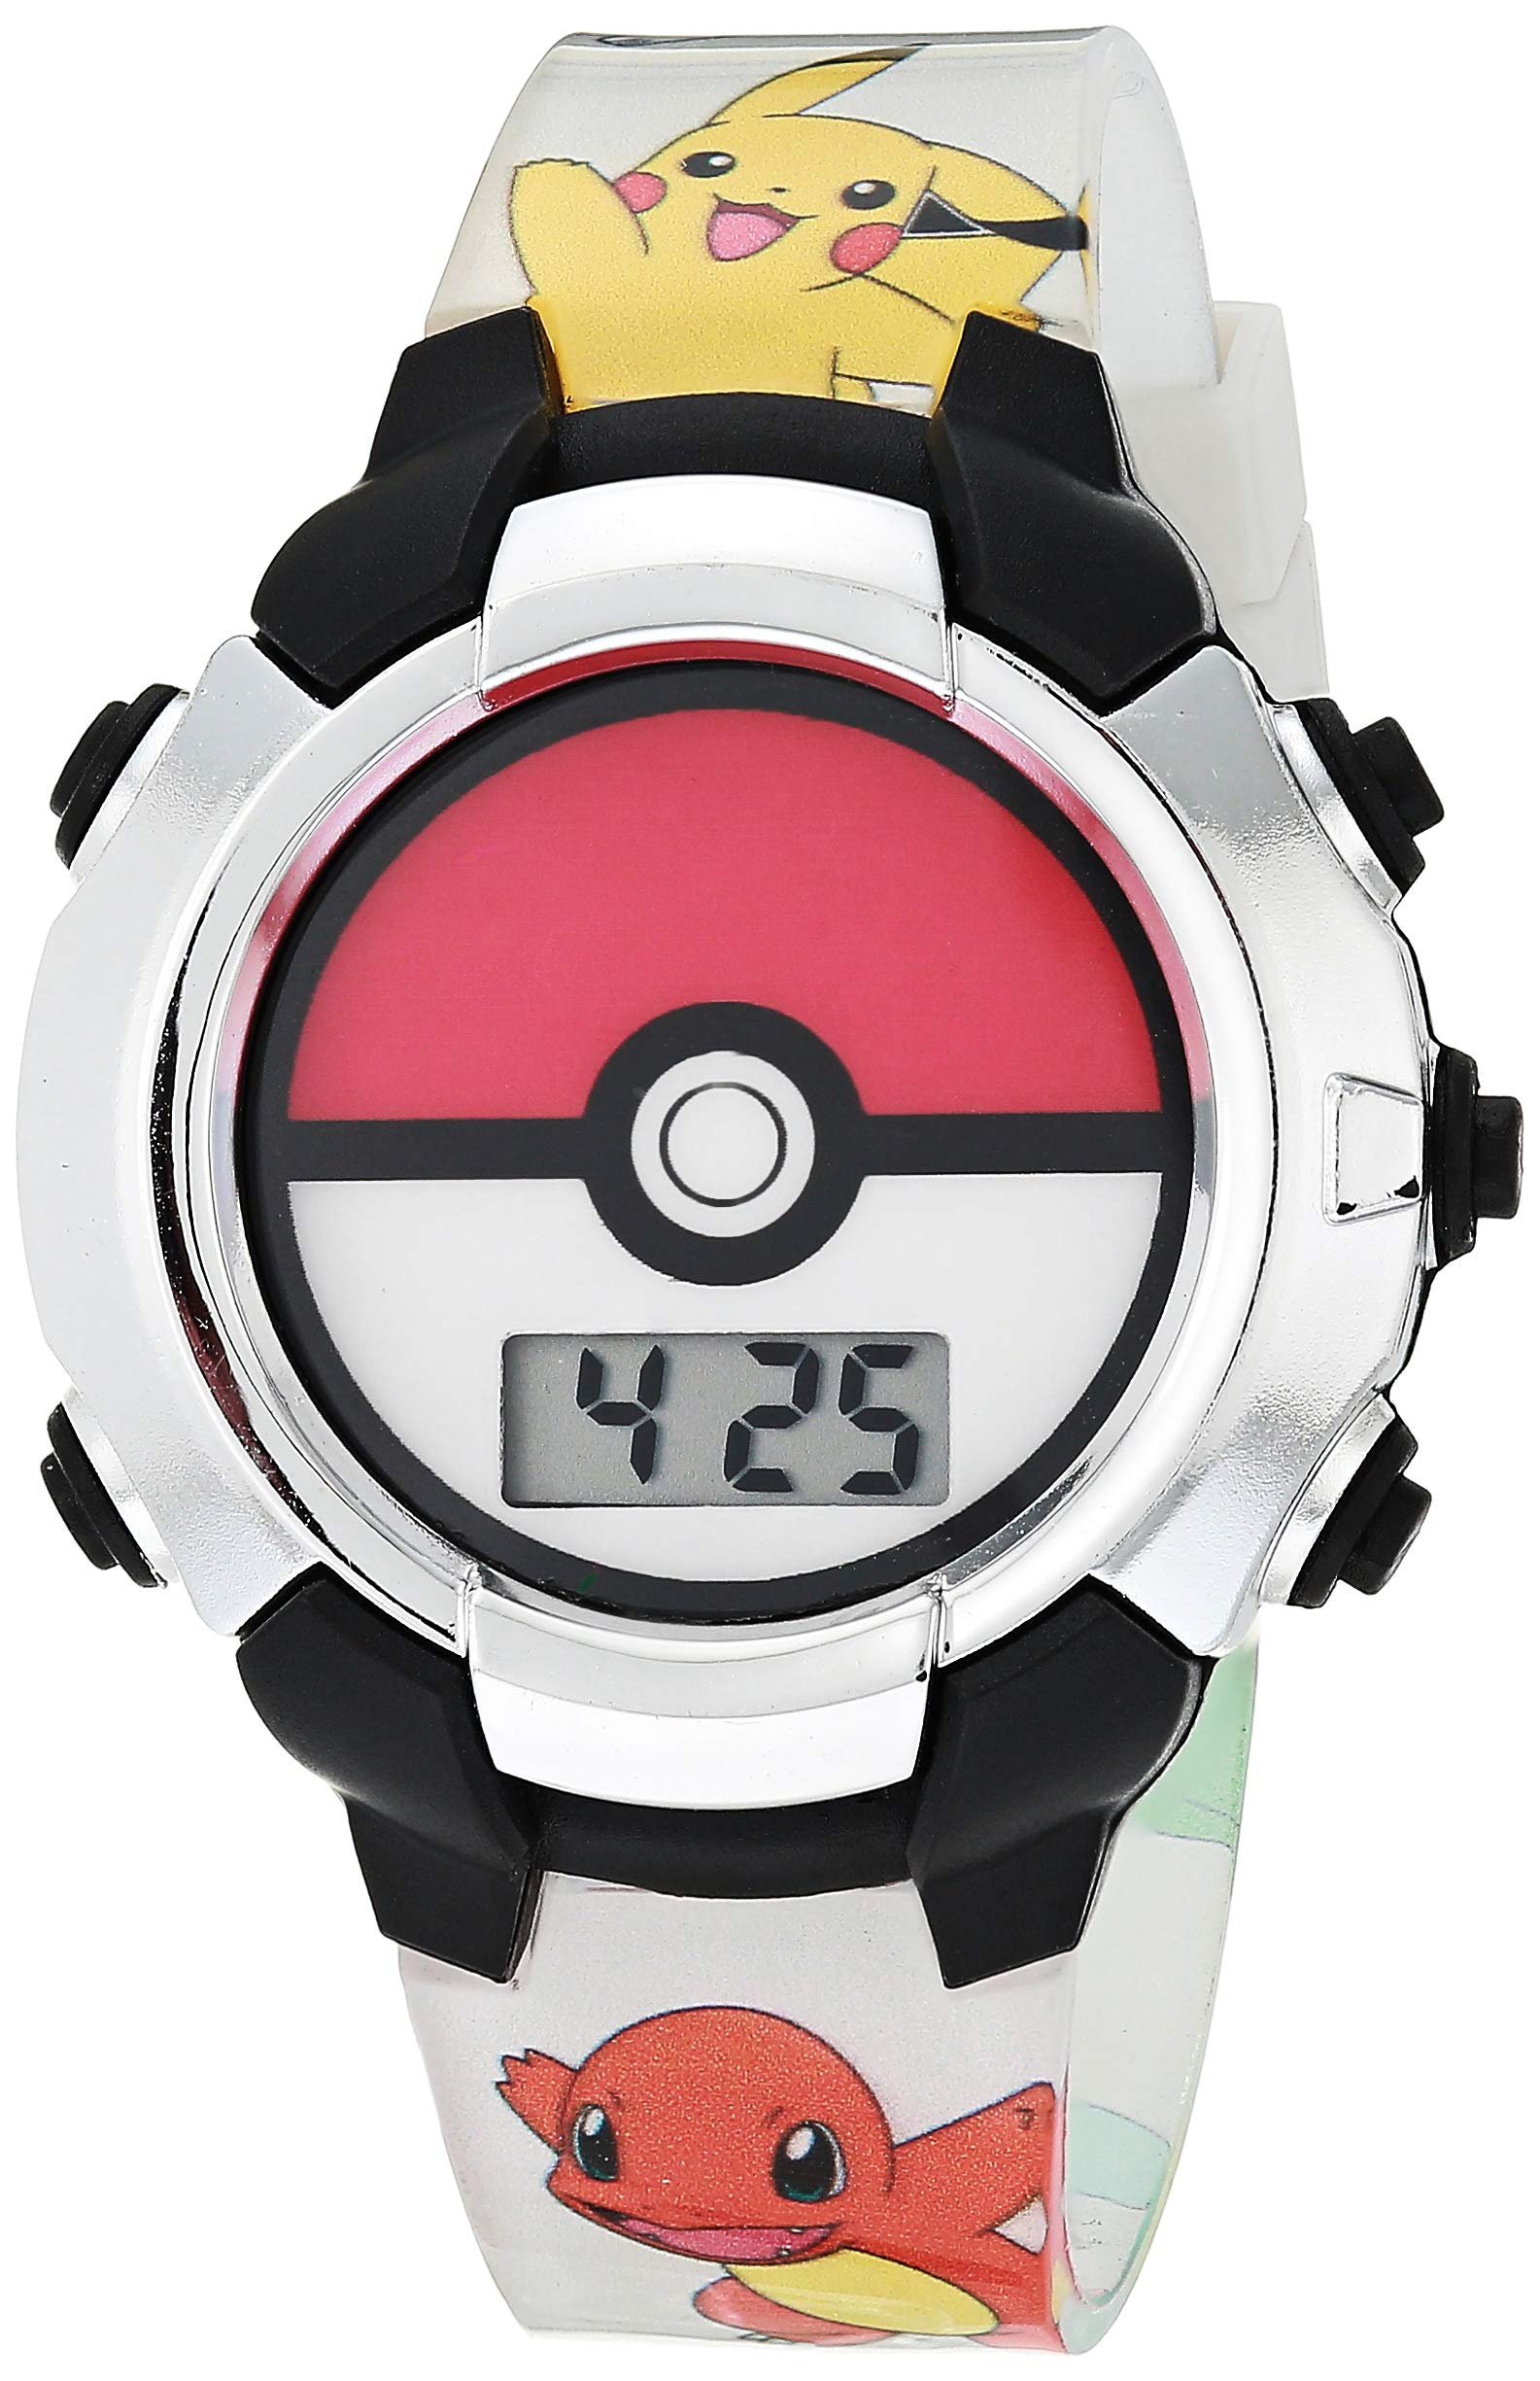 Accutime Kids Pokemon Digital LCD Quartz Watch for Boys, Girls, and Adults All Ages